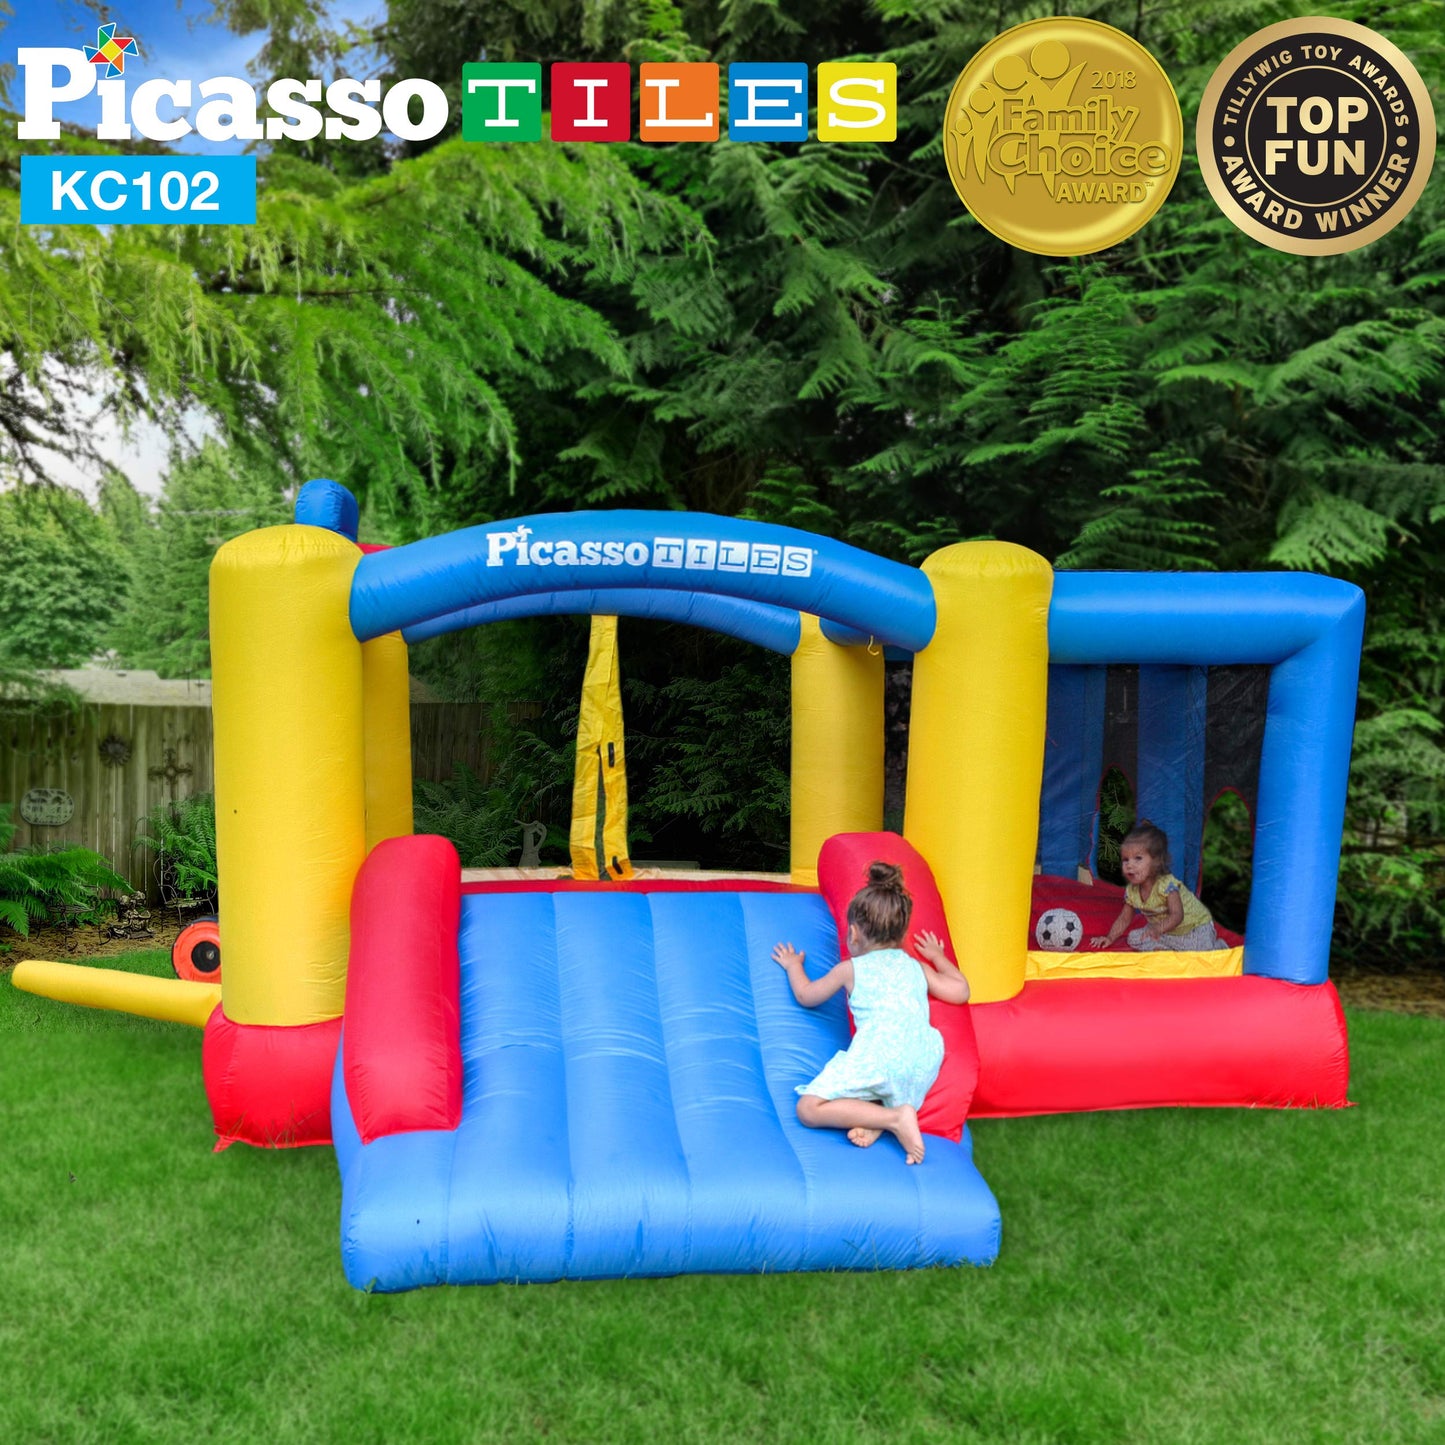 [Version de mise à niveau] Picasso Toys KC102 12 x 10 pieds Gonflable Bouncer Jumping Bouncer House, Jump Slide, Dunk Playhouse w/ Basketball Rim, 4 Sports Balls, Full-Size Entry, 580W ETL Certified Blower Bounce House102